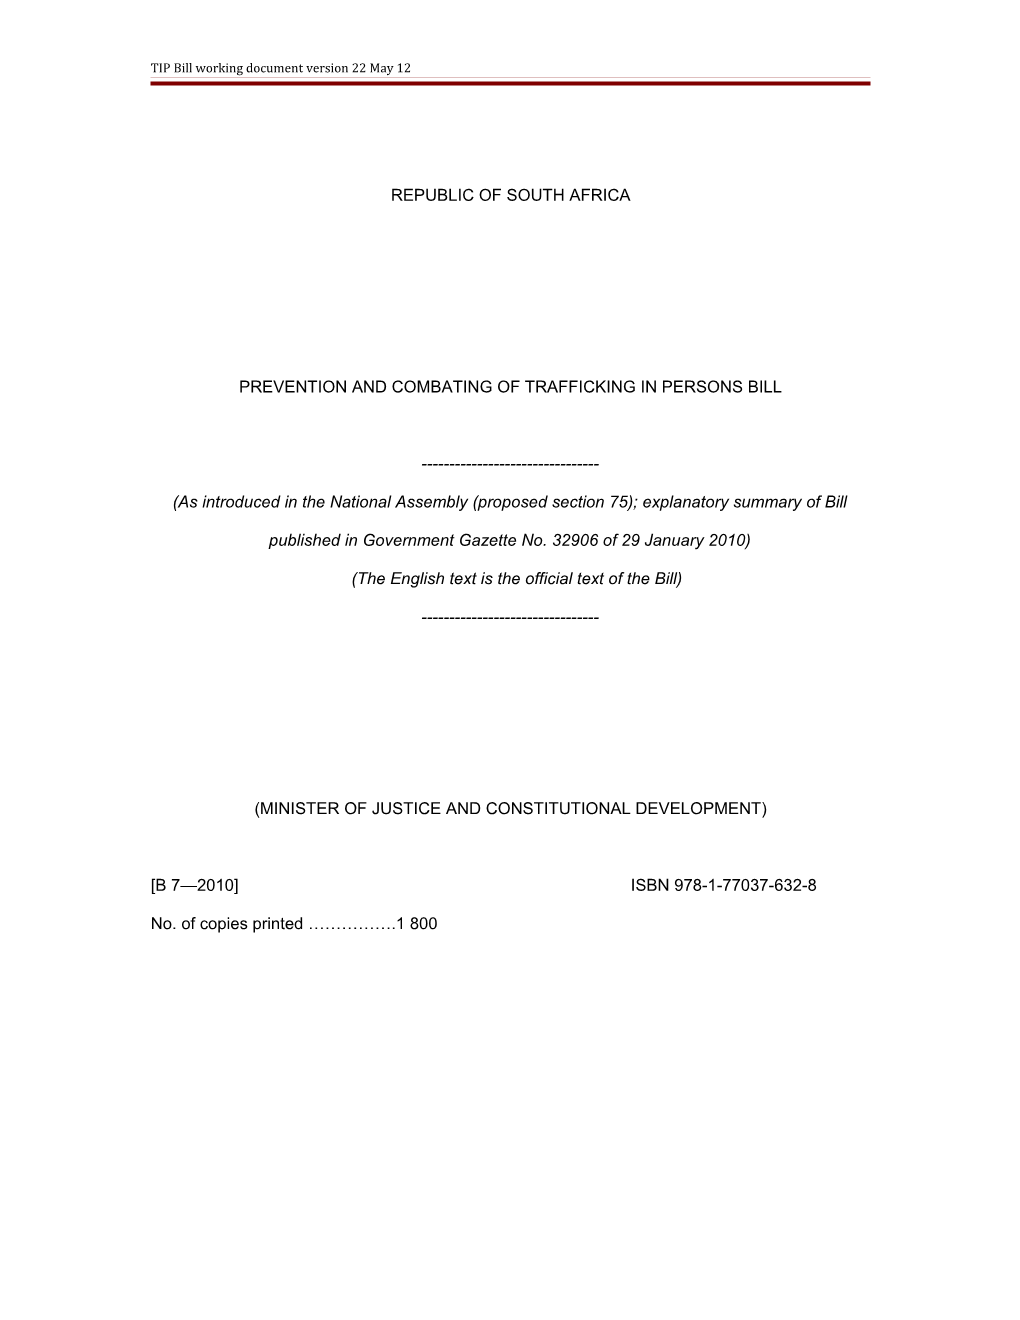 Amendments to TIP Bill Working Document/Doc March 2011